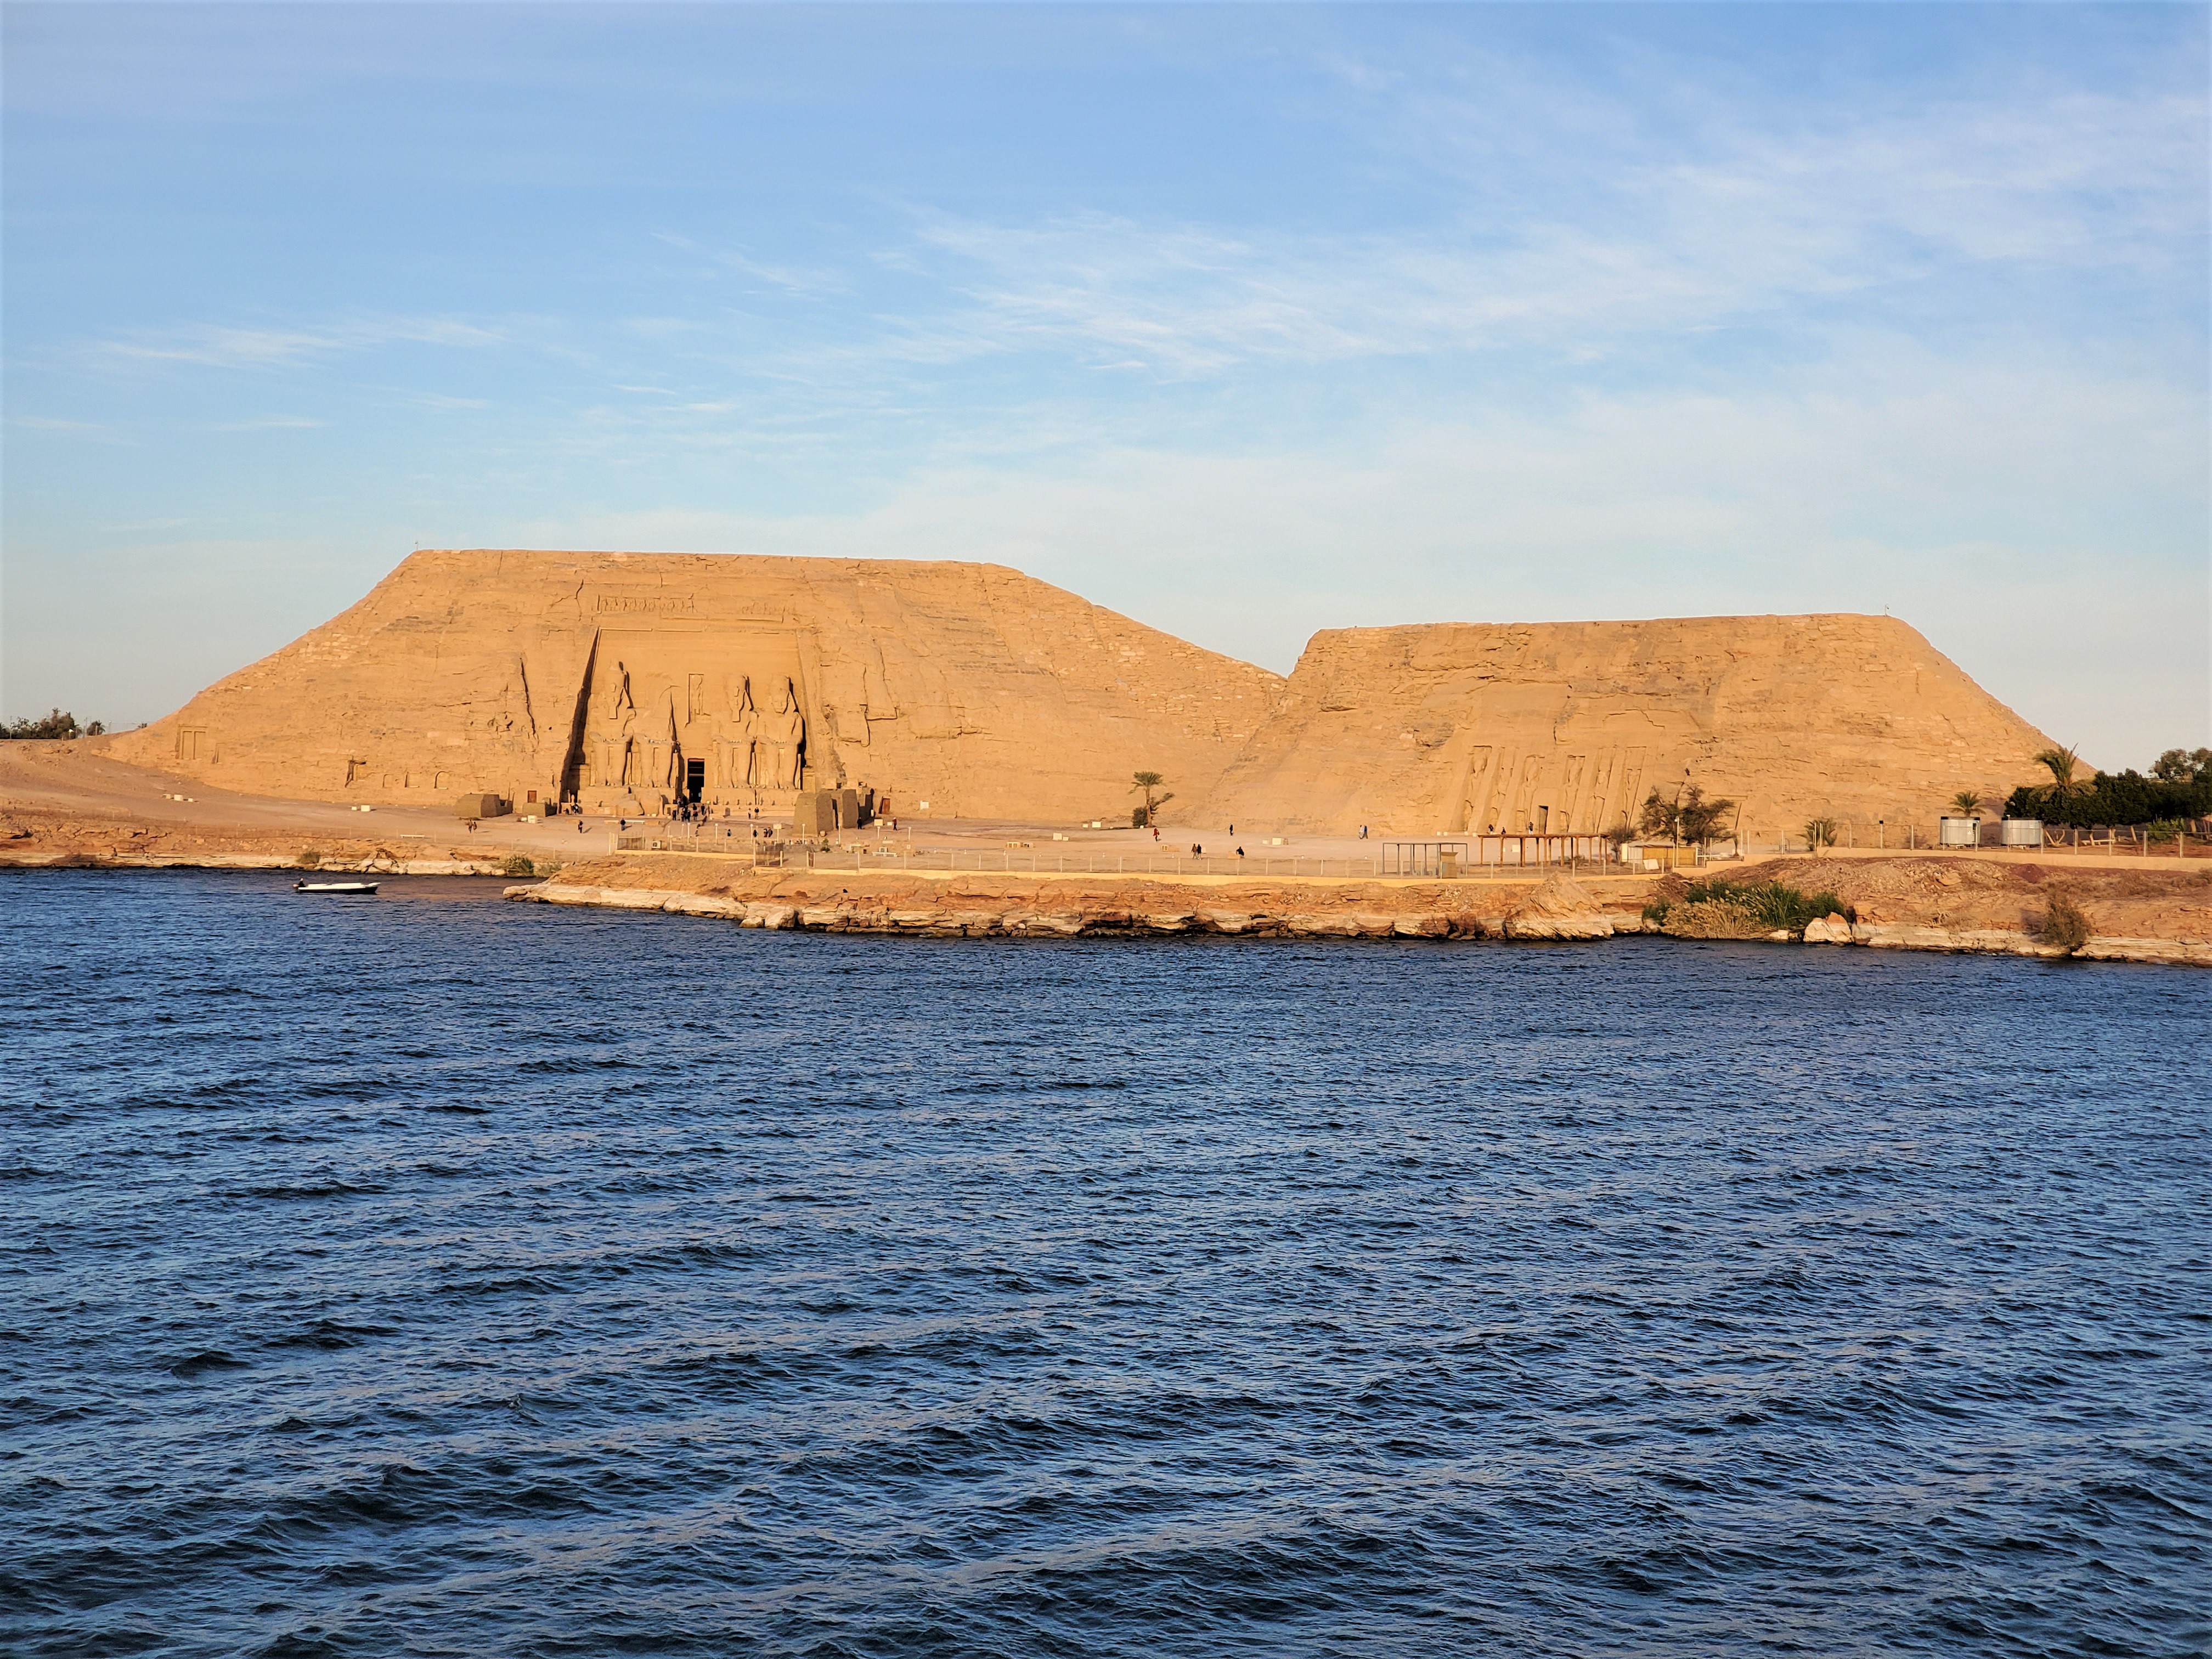 Abu Simbel Temples from the Lake